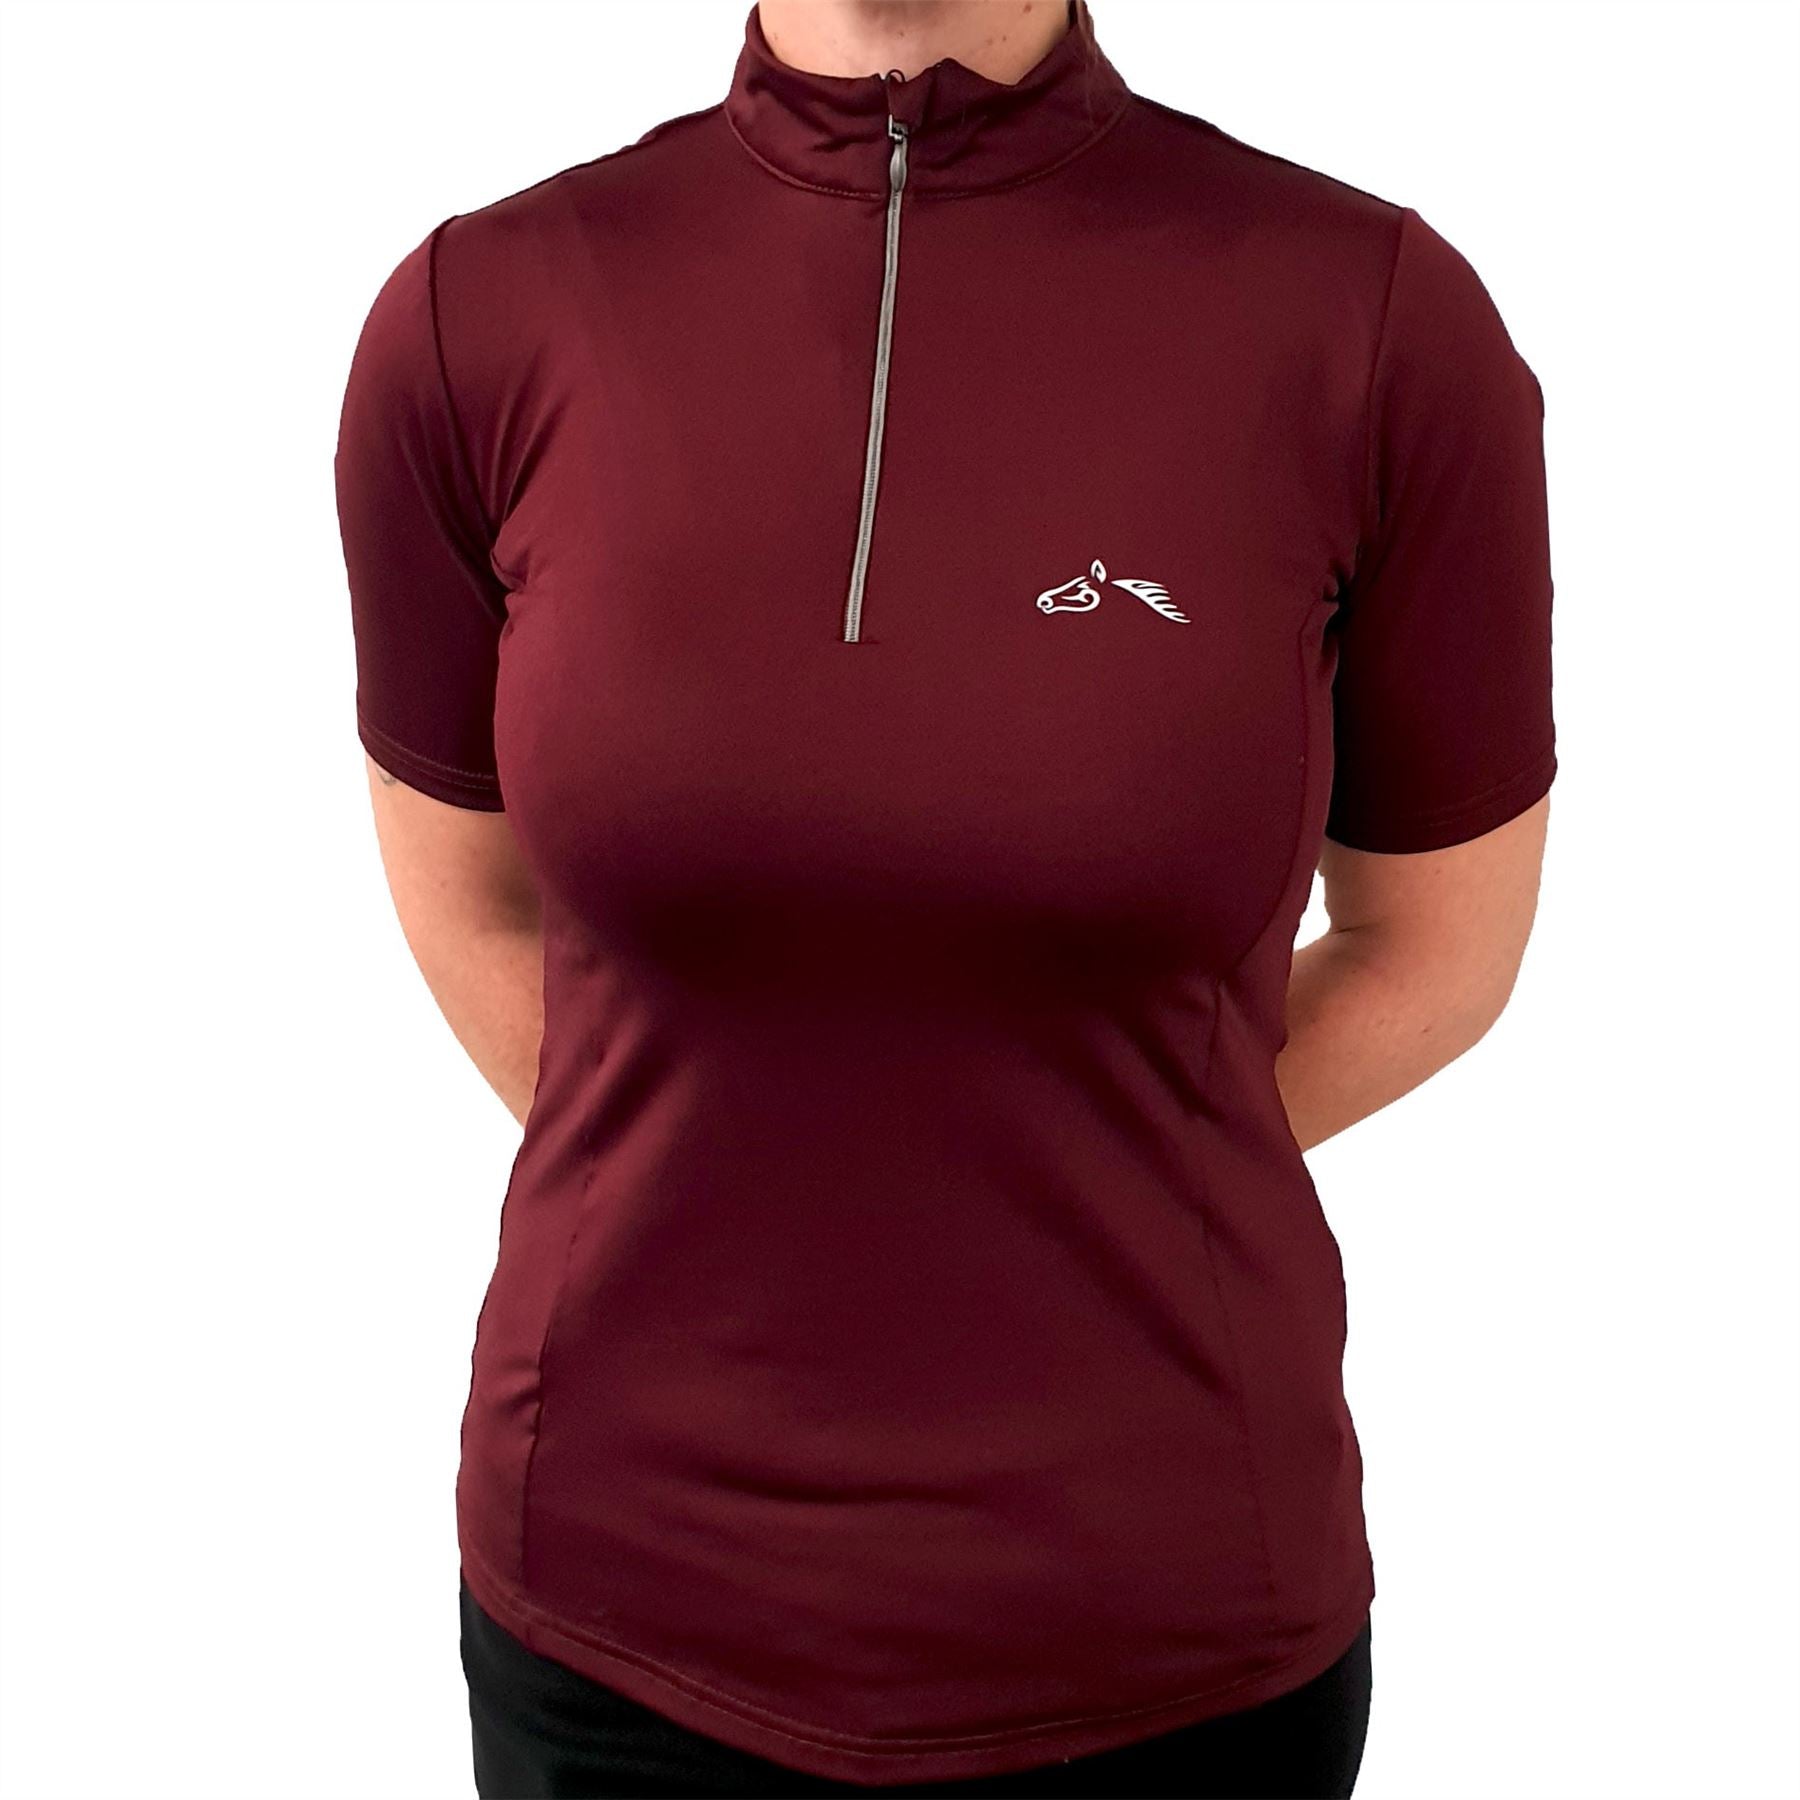 Gallop Equestrian Short Sleeve Zipped Neck Base-Layer - Just Horse Riders